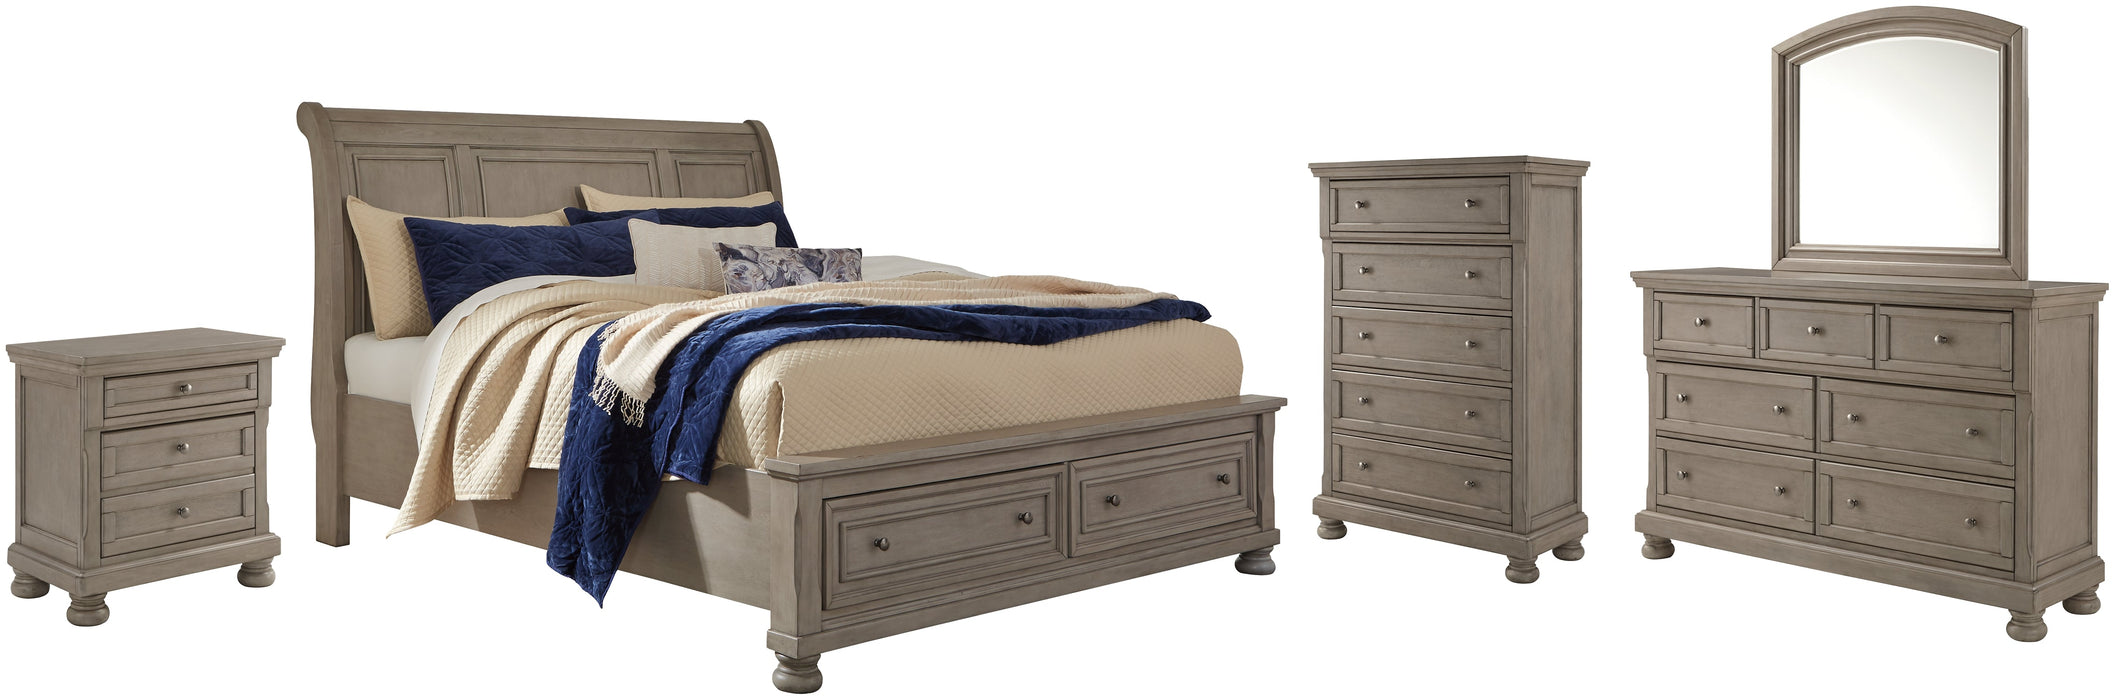 Lettner Queen Sleigh Bed with 2 Storage Drawers with Mirrored Dresser, Chest and Nightstand JR Furniture Storefurniture, home furniture, home decor